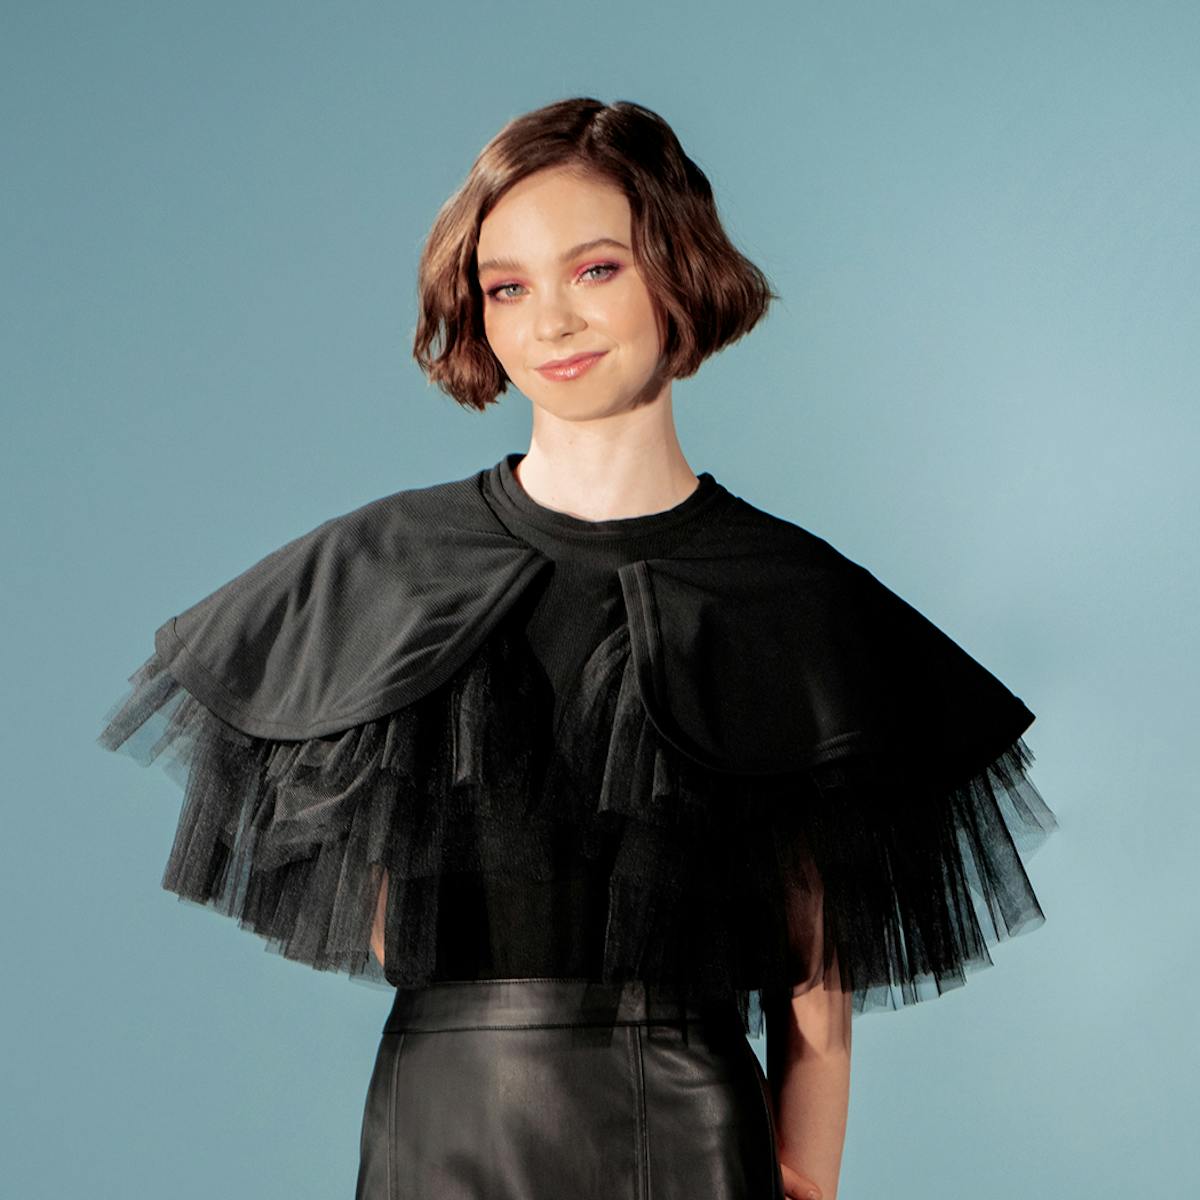 Emma Myers wears a black ensemble: a black leather skirt, a chiffon top with dignified sleeves, and strappy platforms. She stands on a black-and-white checkered floor against a blue background.